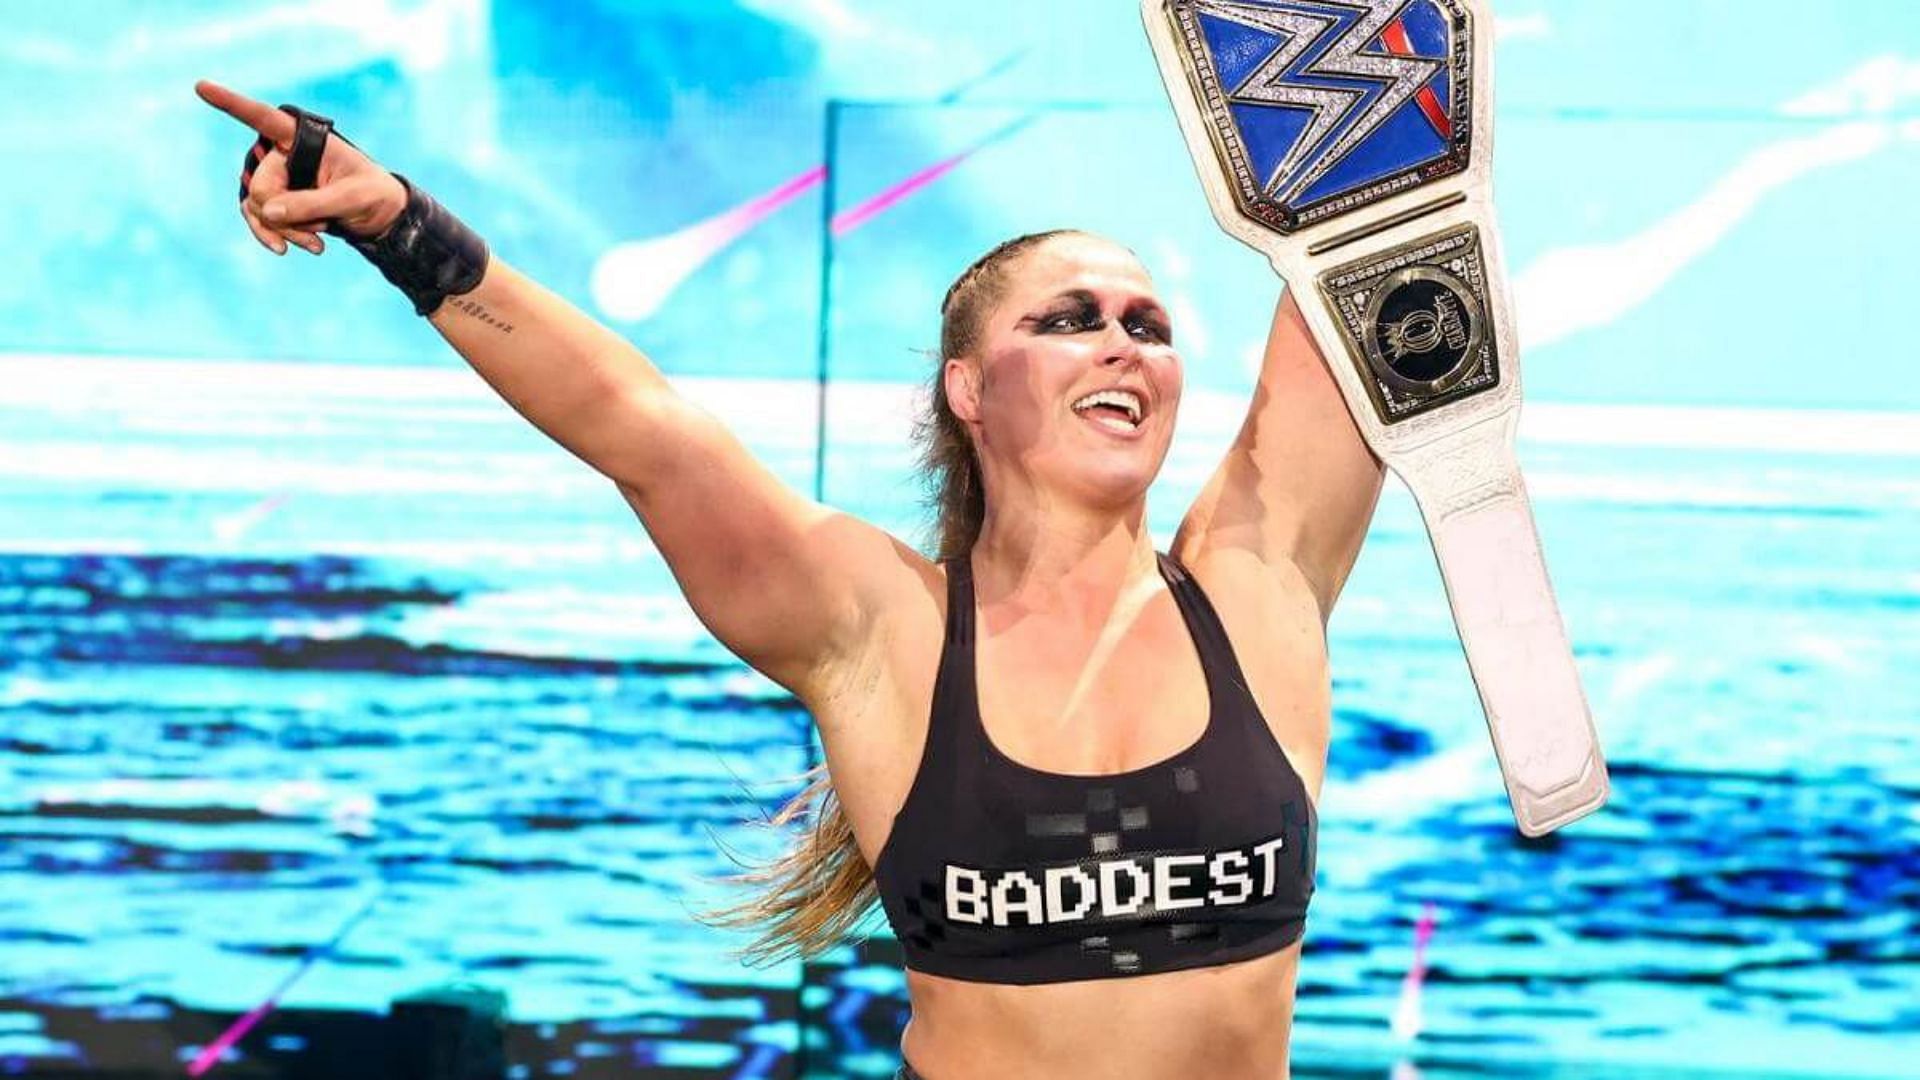 Ronda Rousey currently has no challenger for her title.